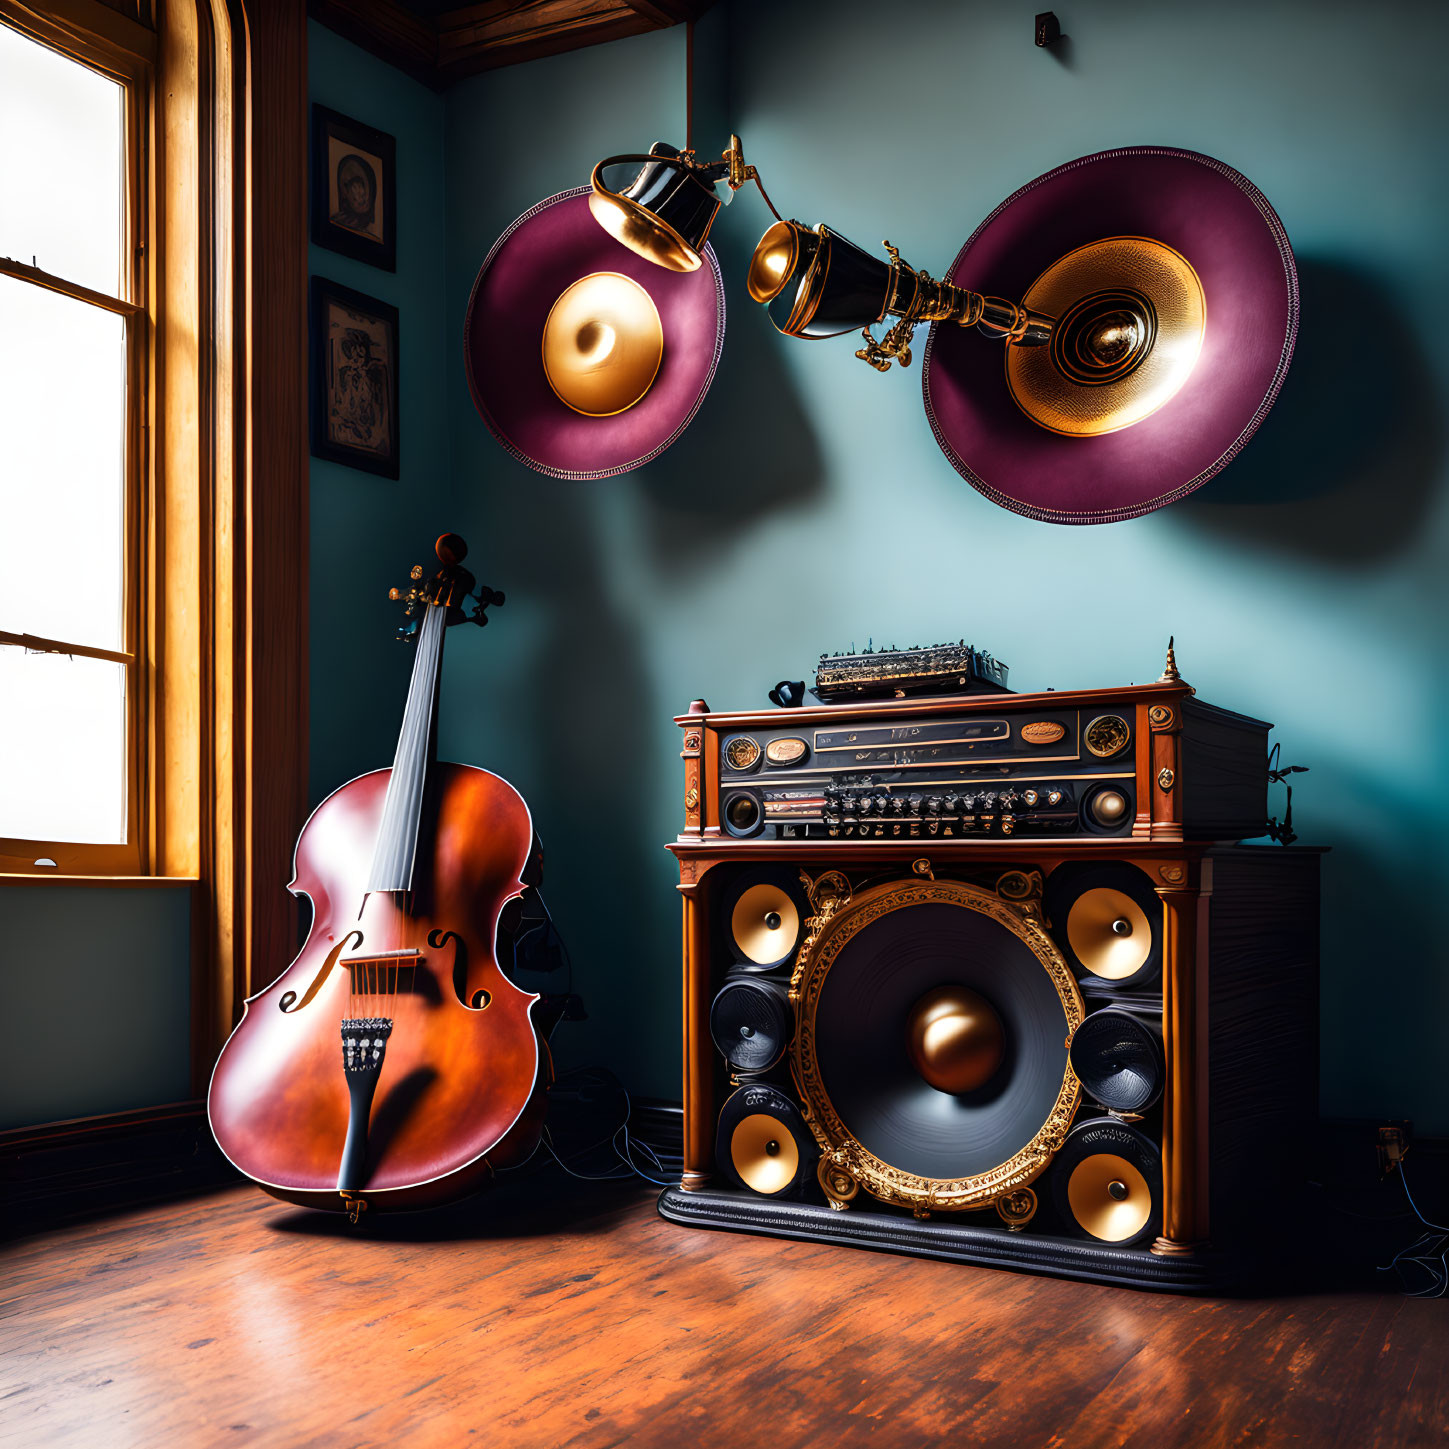 Vintage Music Room with Cello, Gramophone Speakers, and Antique Radio-Cabinet